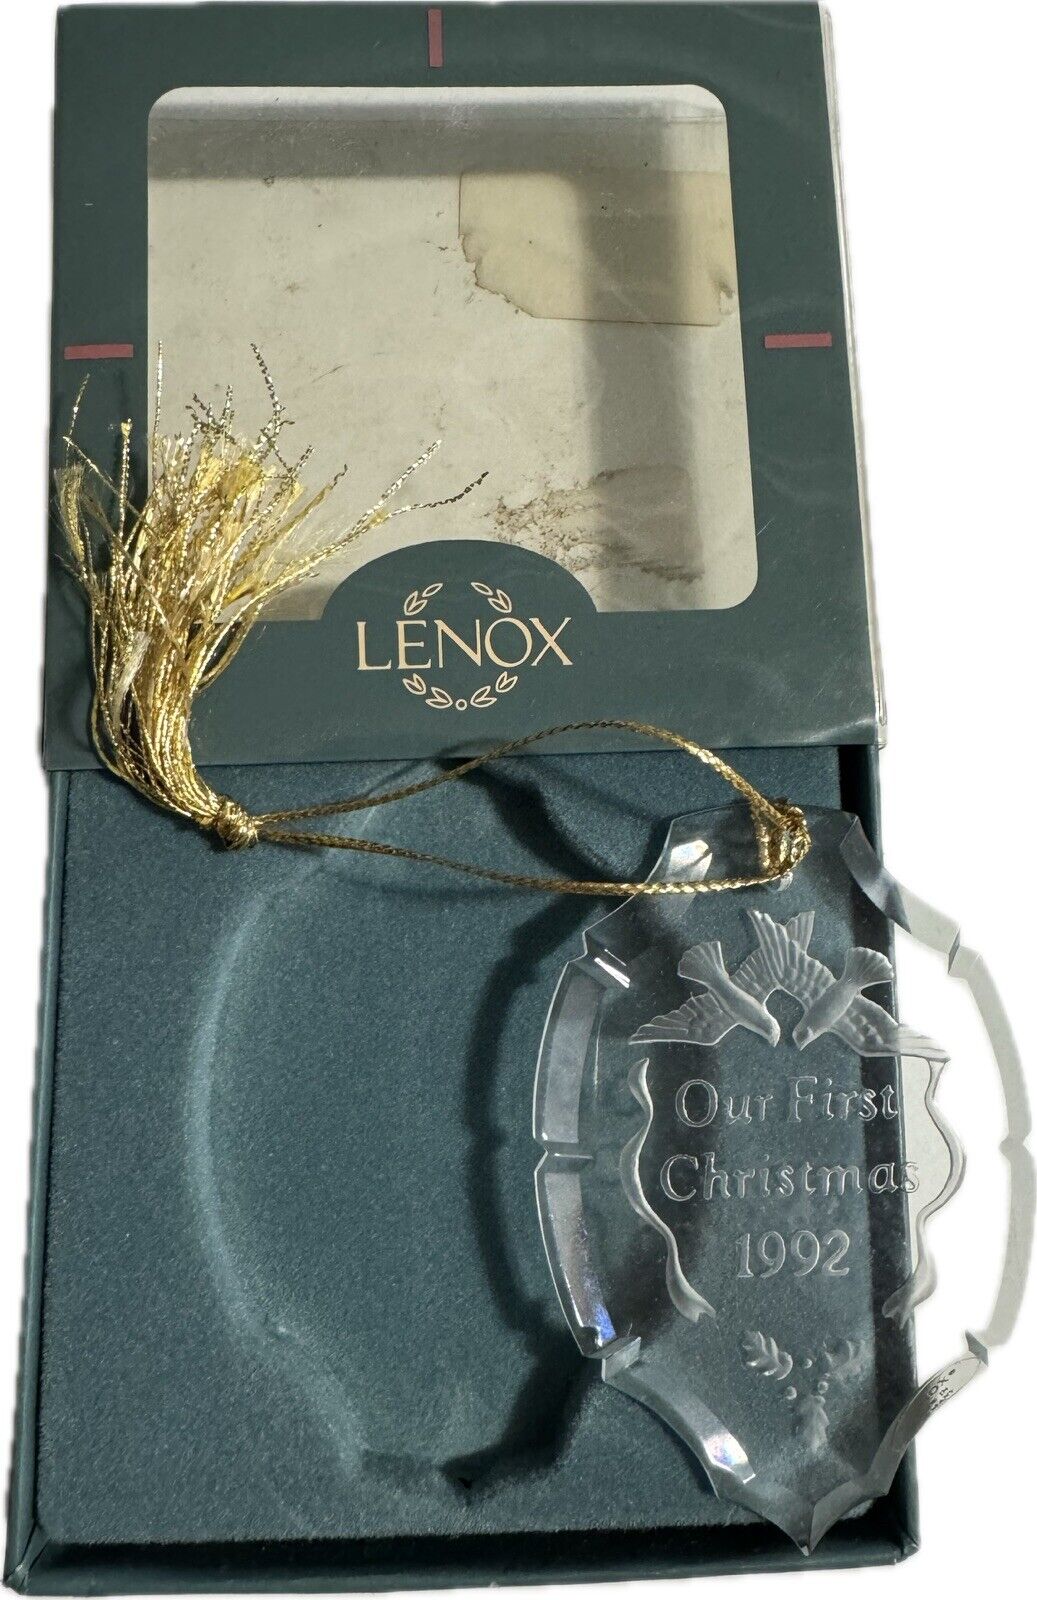 Lenox Crystal Our First Christmas 1992 Ornament in Original Box